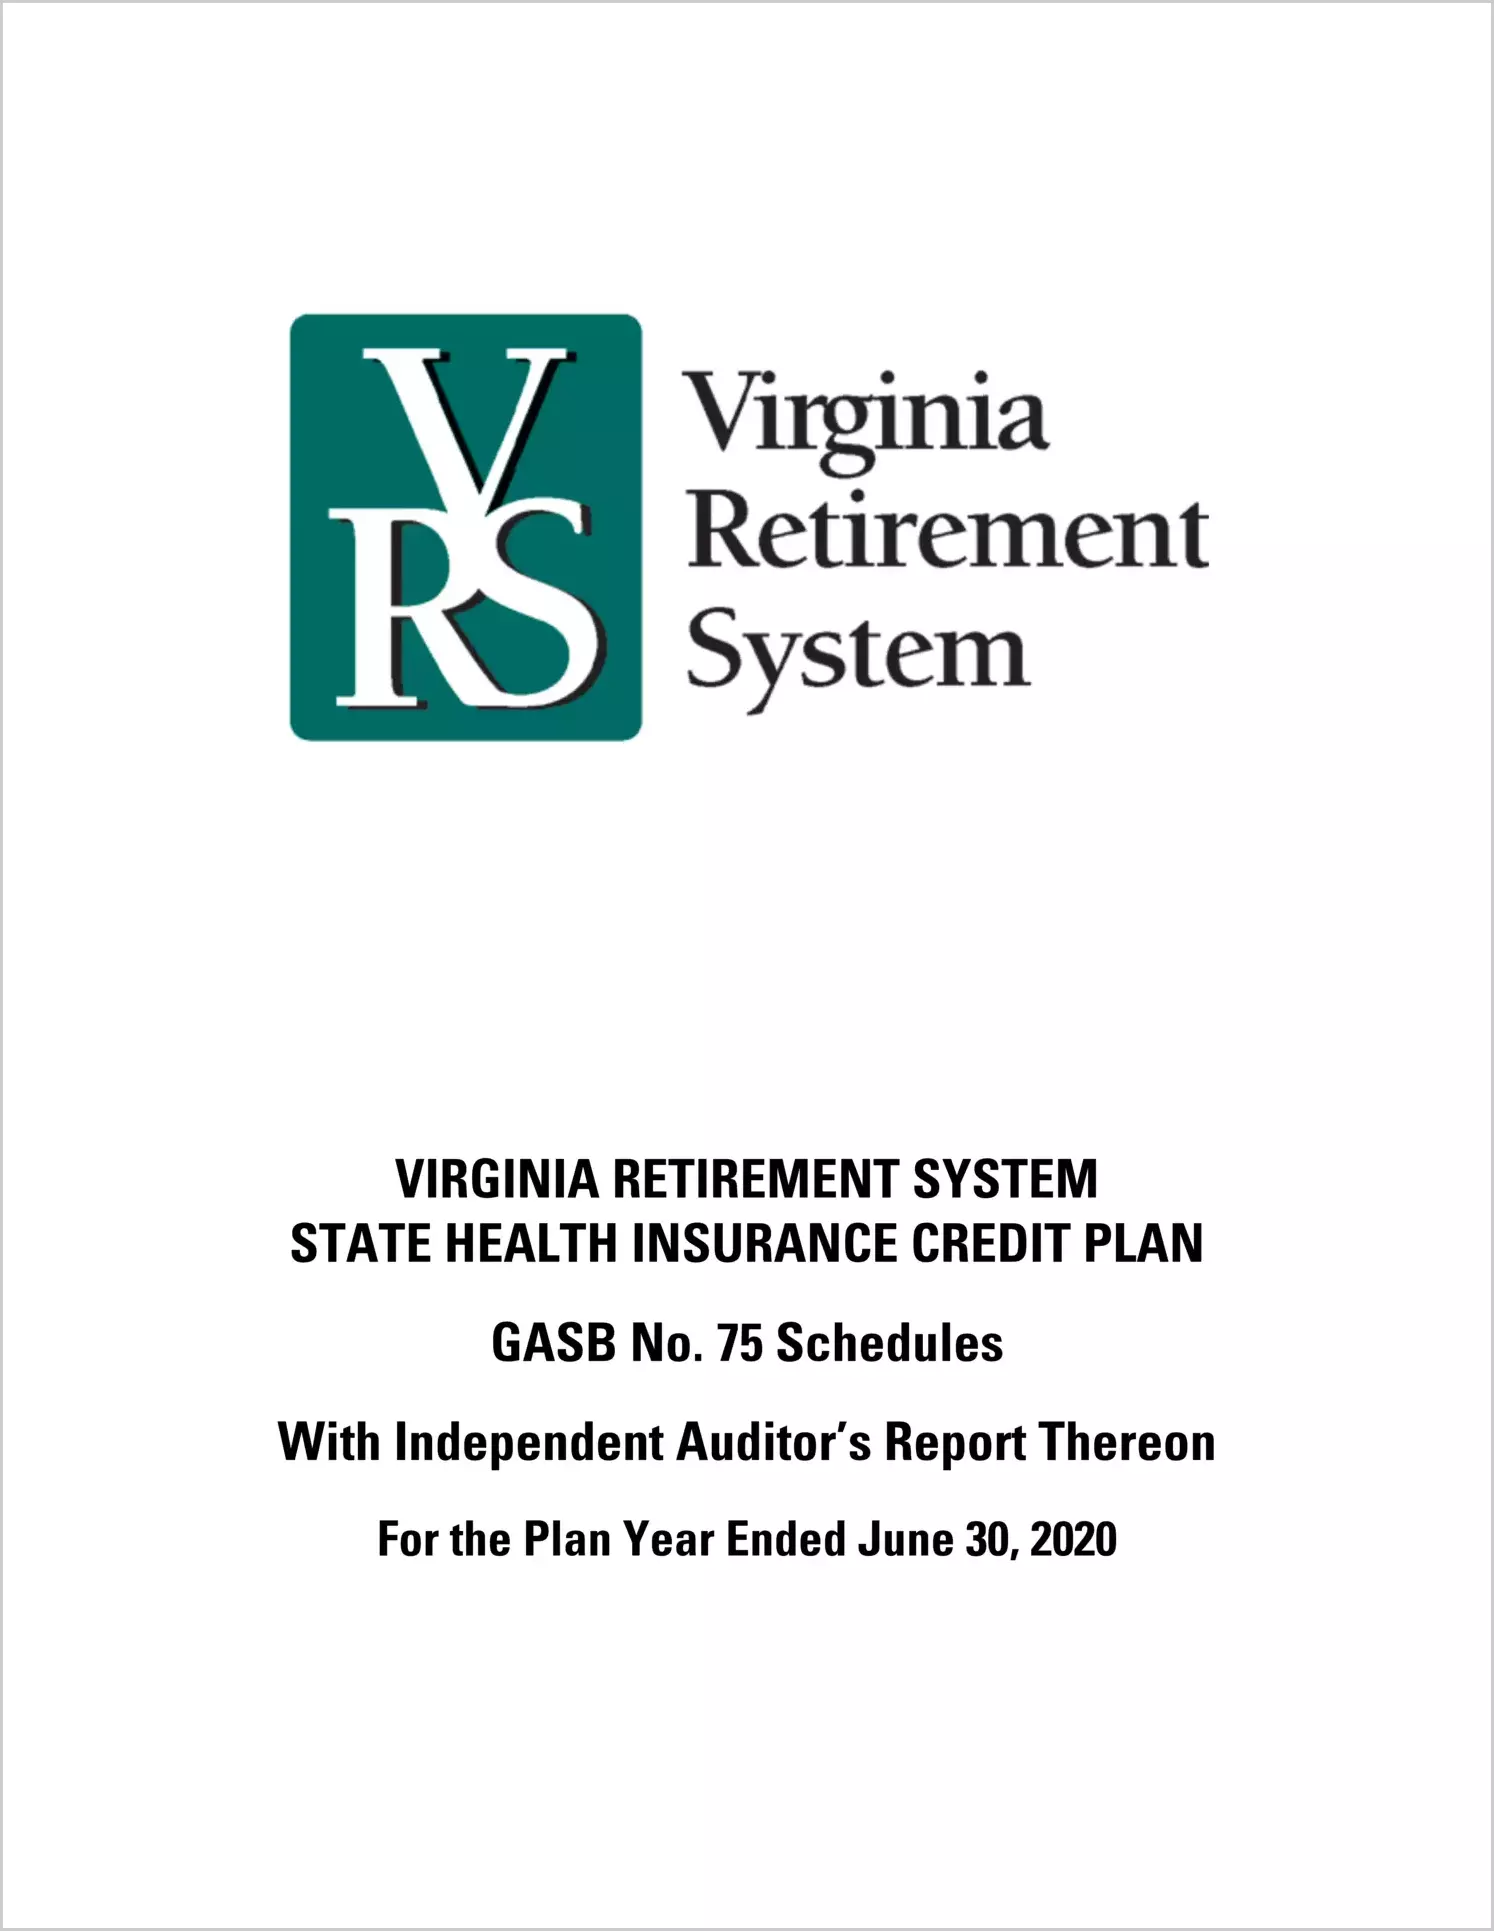 GASB 75 Schedules - Virginia Retirement System State Health Insurance Credit Plan for the year ended June 30, 2020